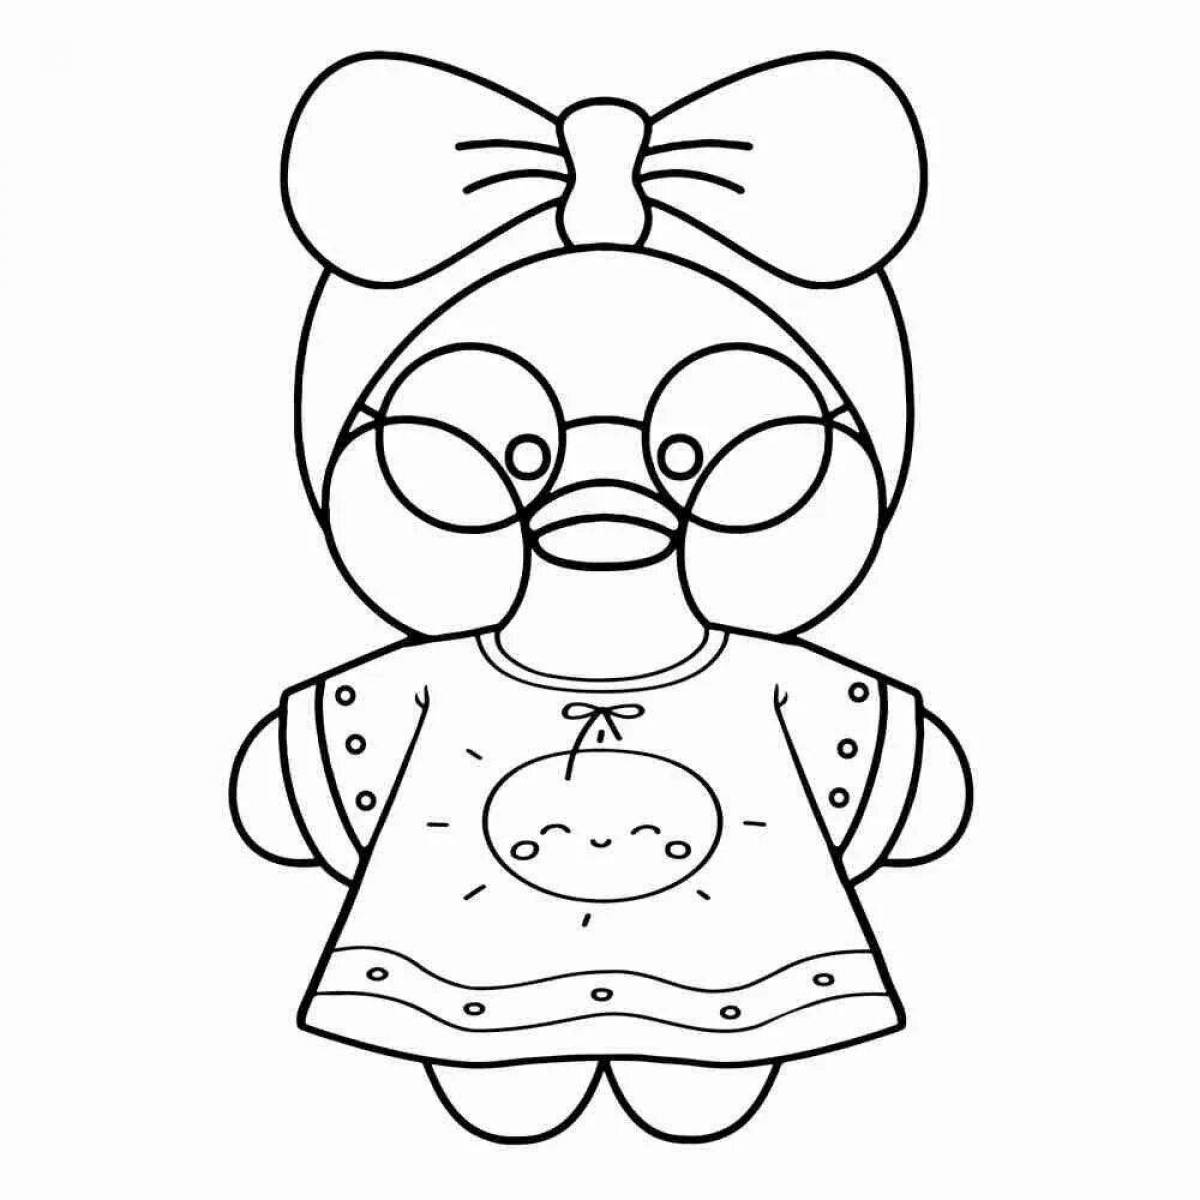 Coloring page charming duckling - lalafanfan